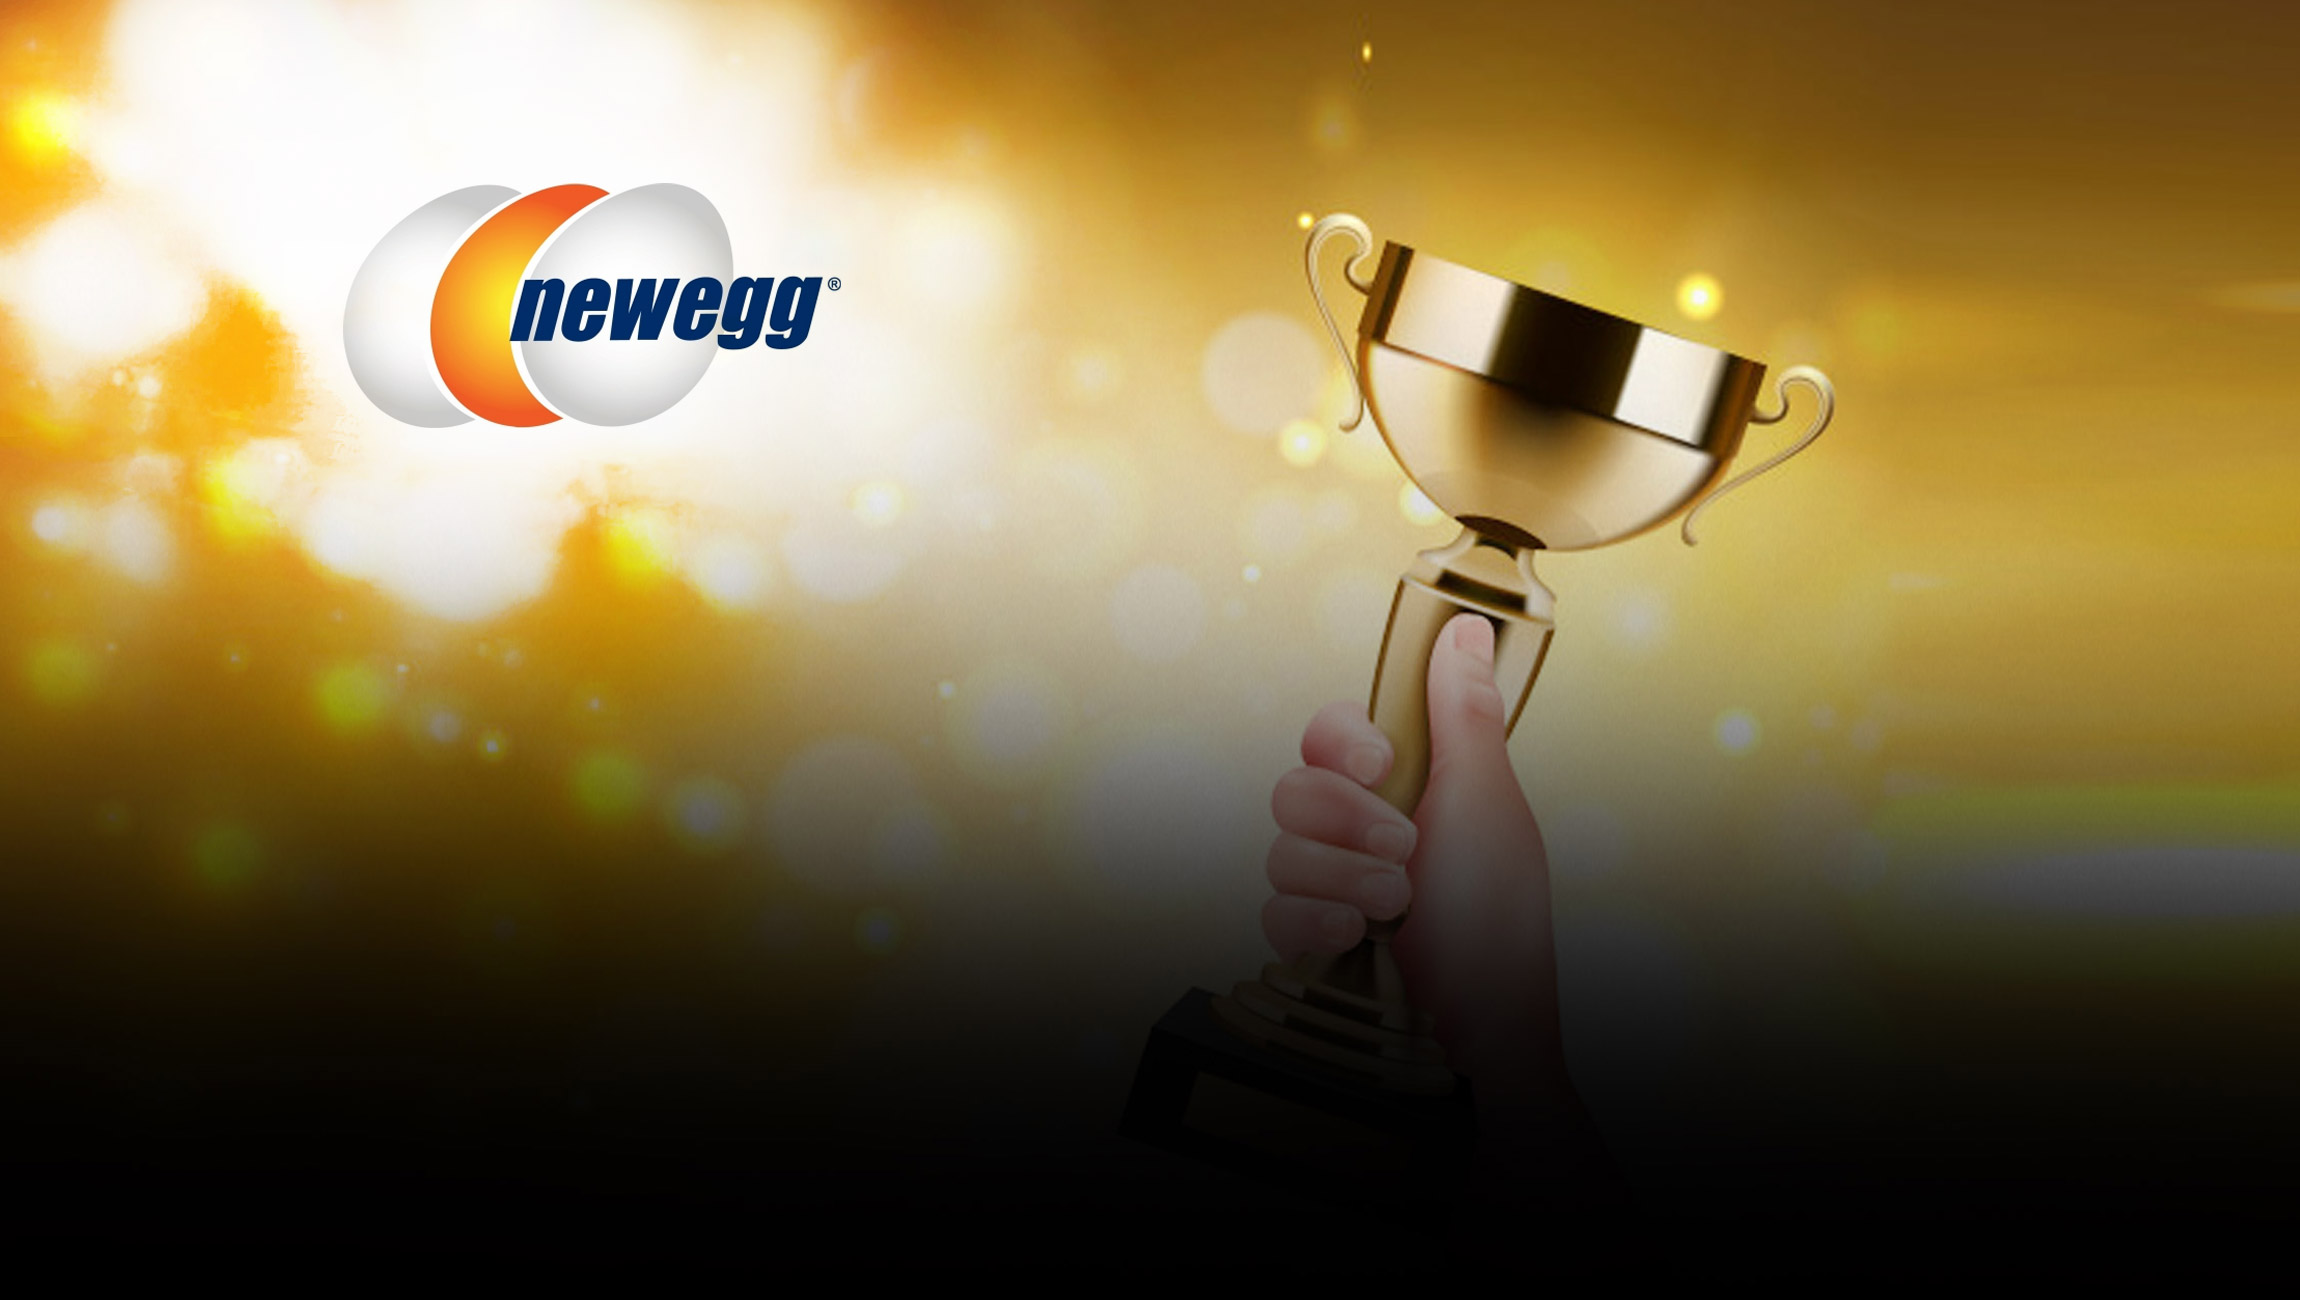 Newegg’s Annual Eggie Awards Celebrate the Contributions of its Top Partners in 2021